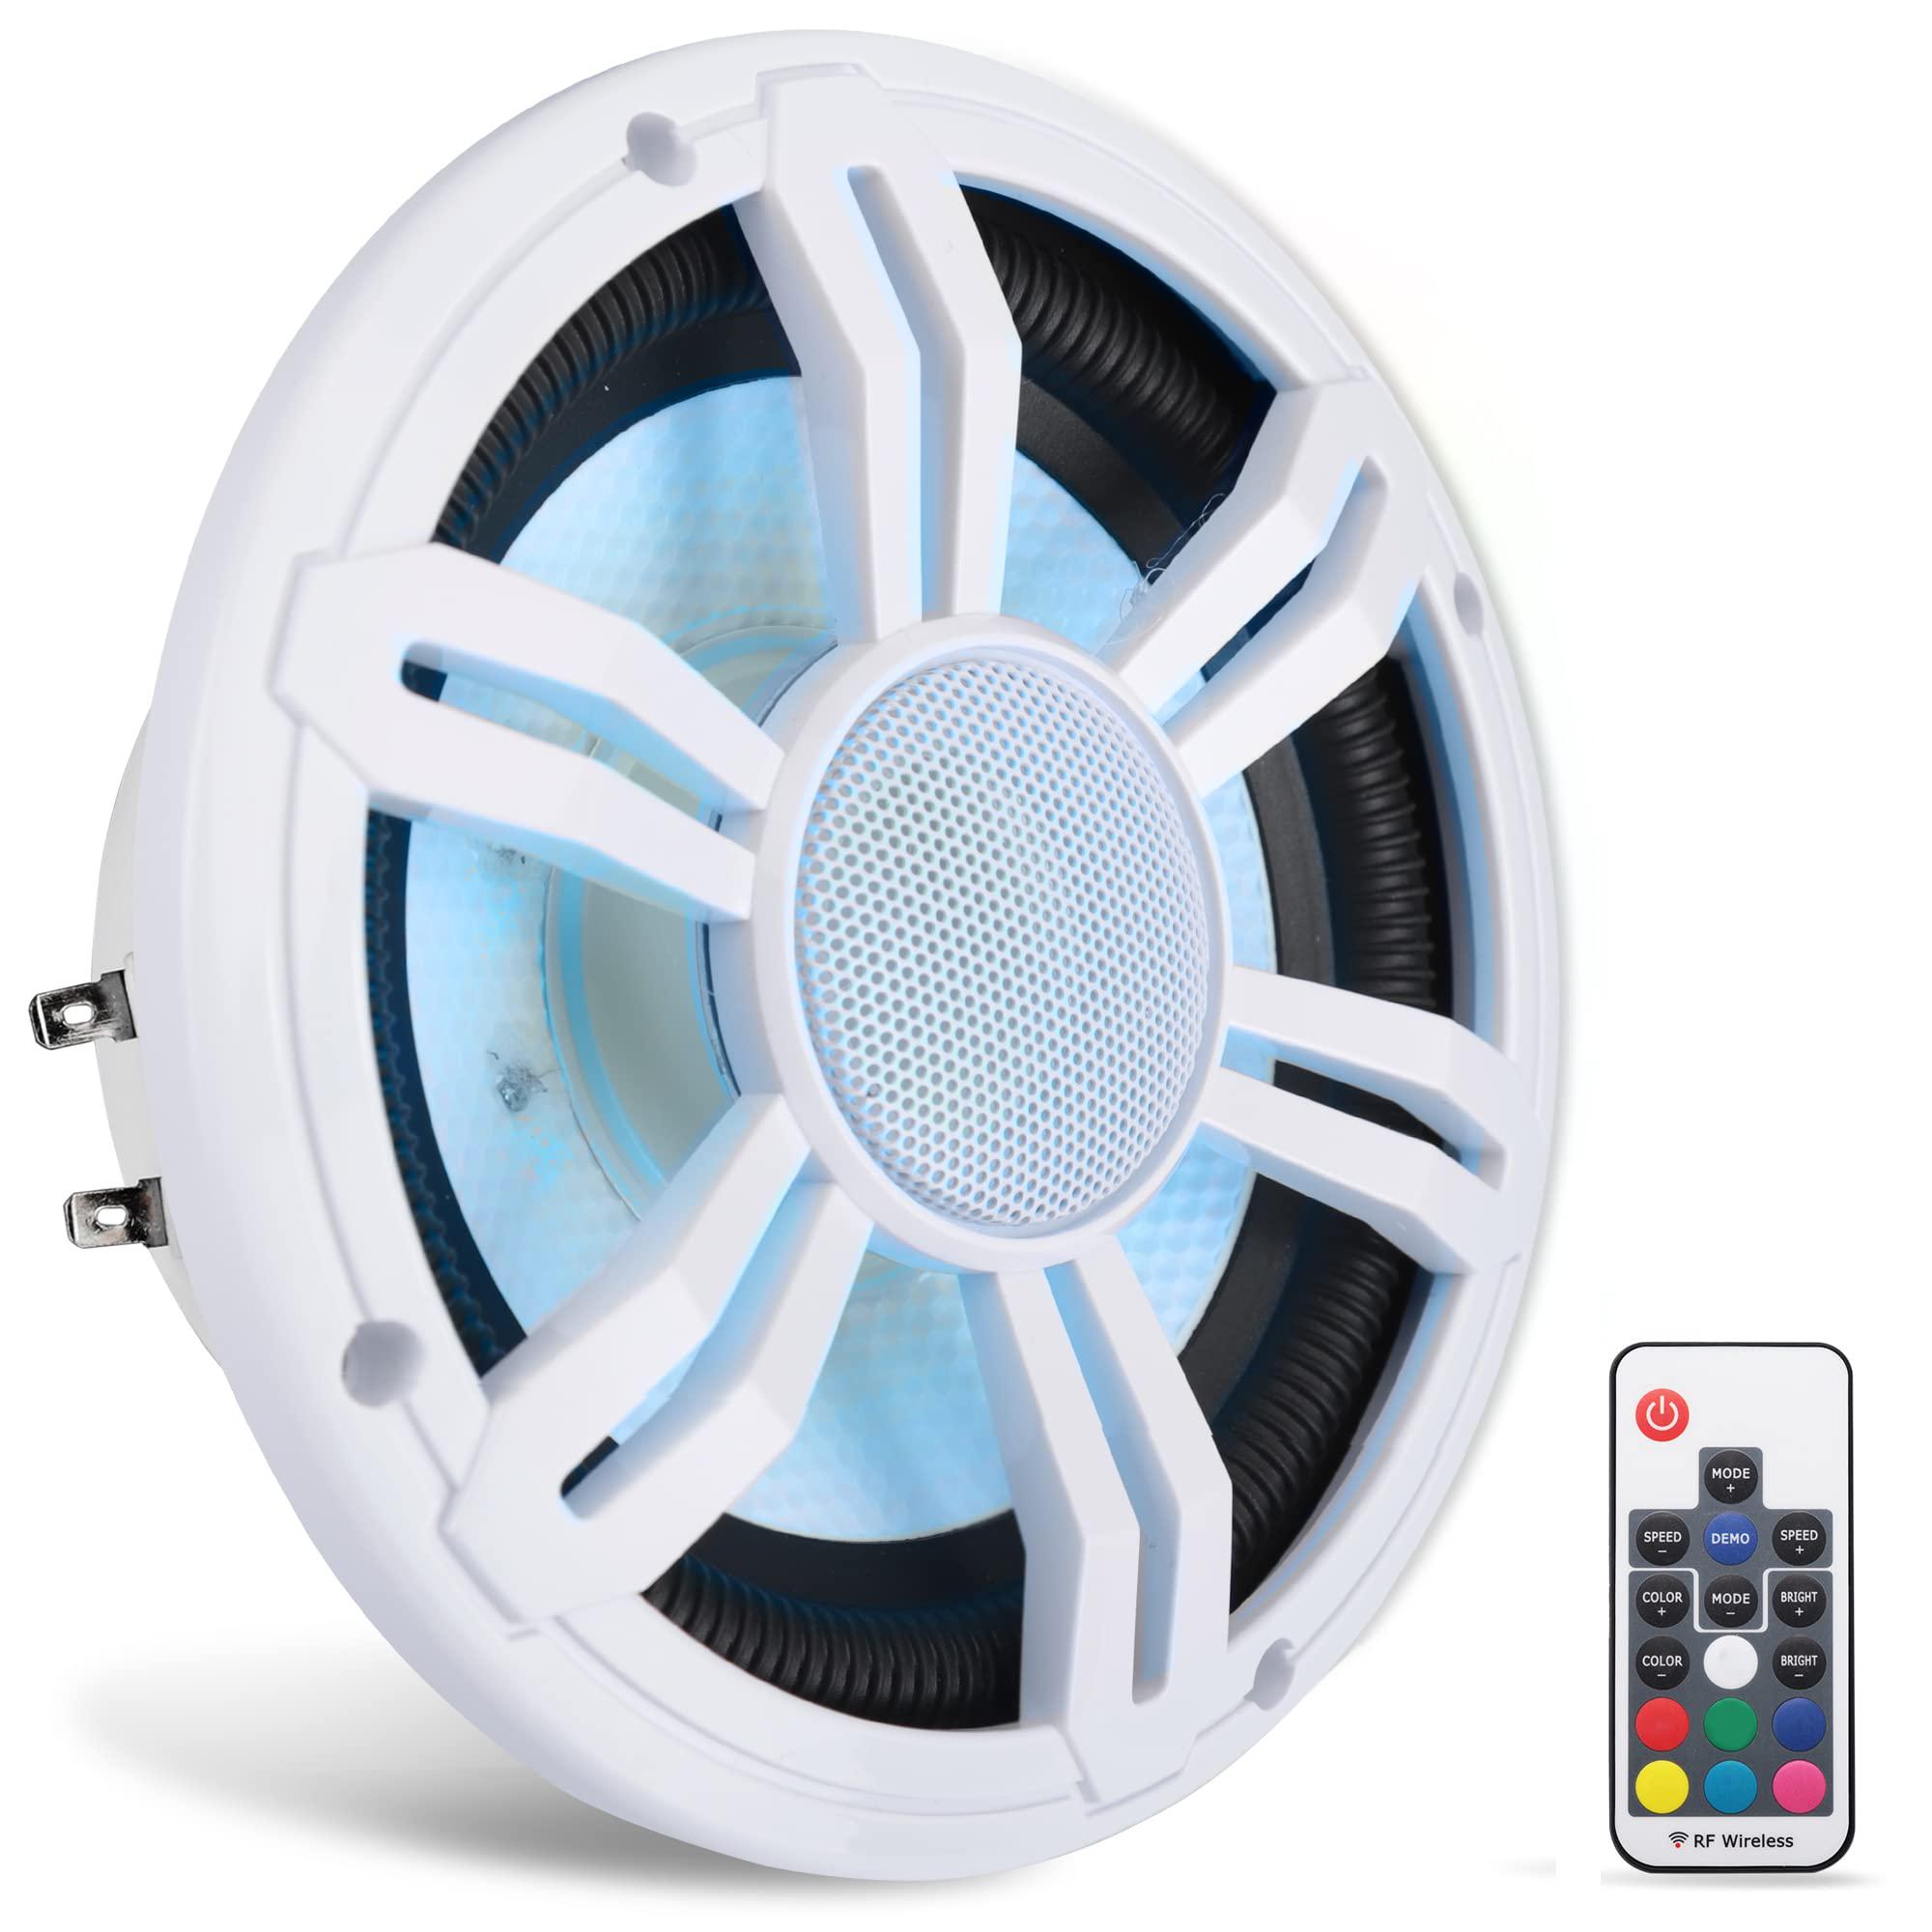 jovial 6.5 inch slim waterproof subwoofer - 150 watts at dual 4-ohms car audio powered subwoofer with multi-color rgb lights 